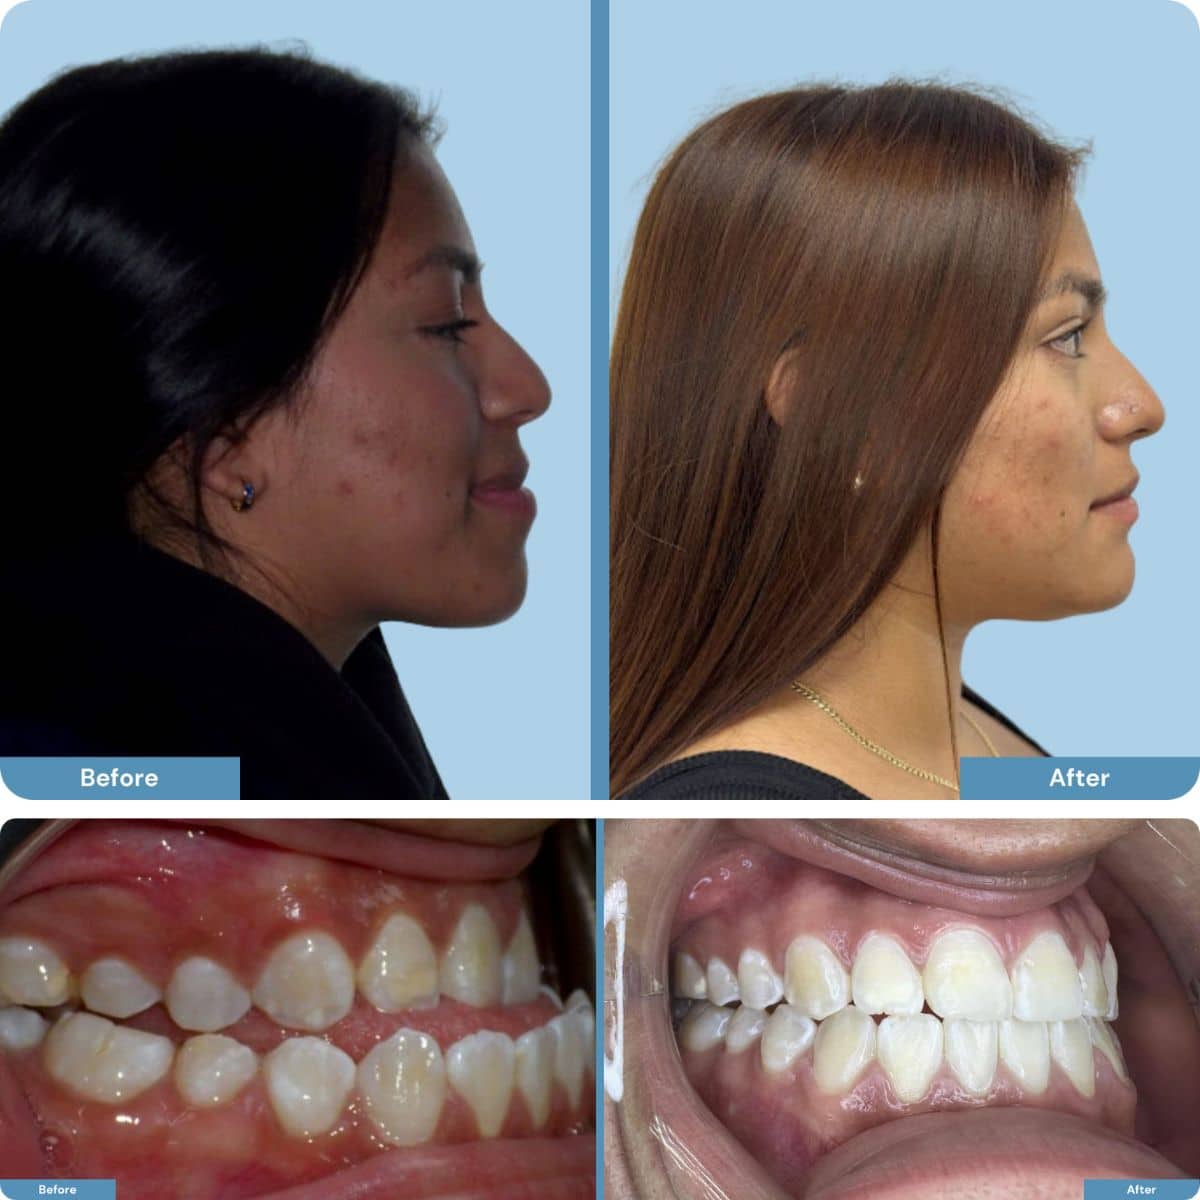 Before and after orthognathic jaw surgery